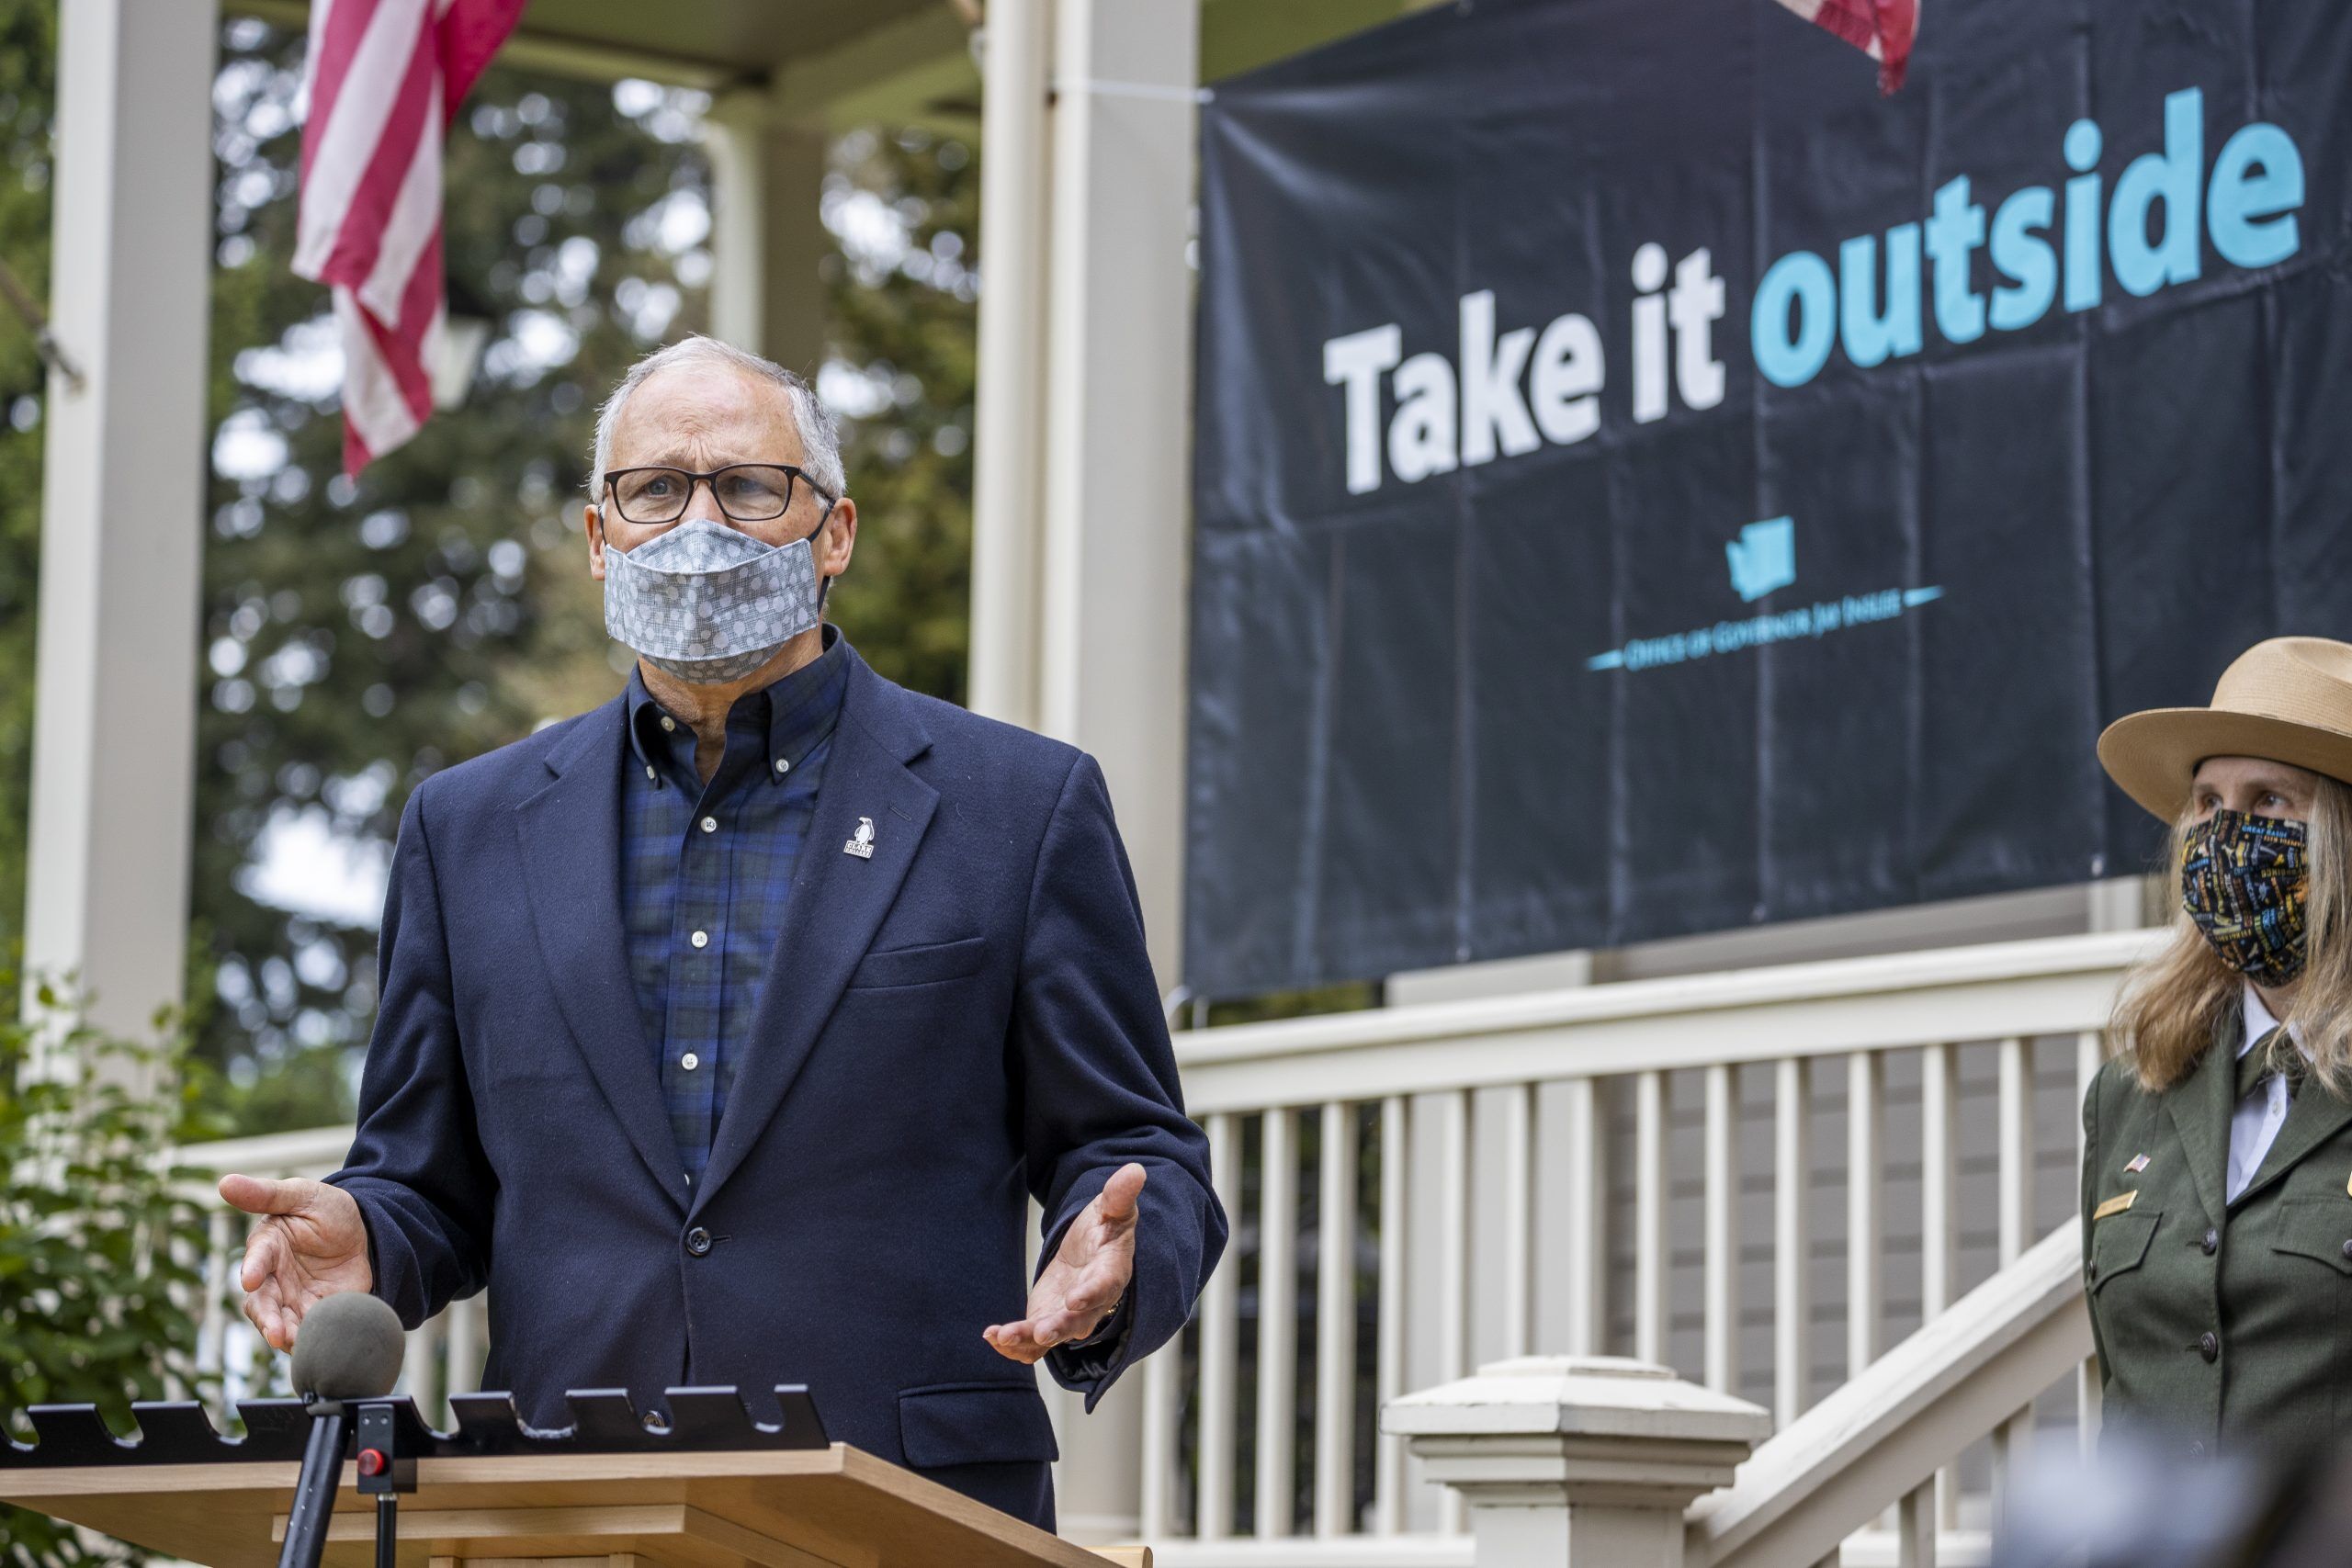 Gov. Jay Inslee is seen here in Vancouver on Friday (April 30), advertising his “Take it outside” campaign against the COVID-19 virus. Photo by Jacob Granneman
